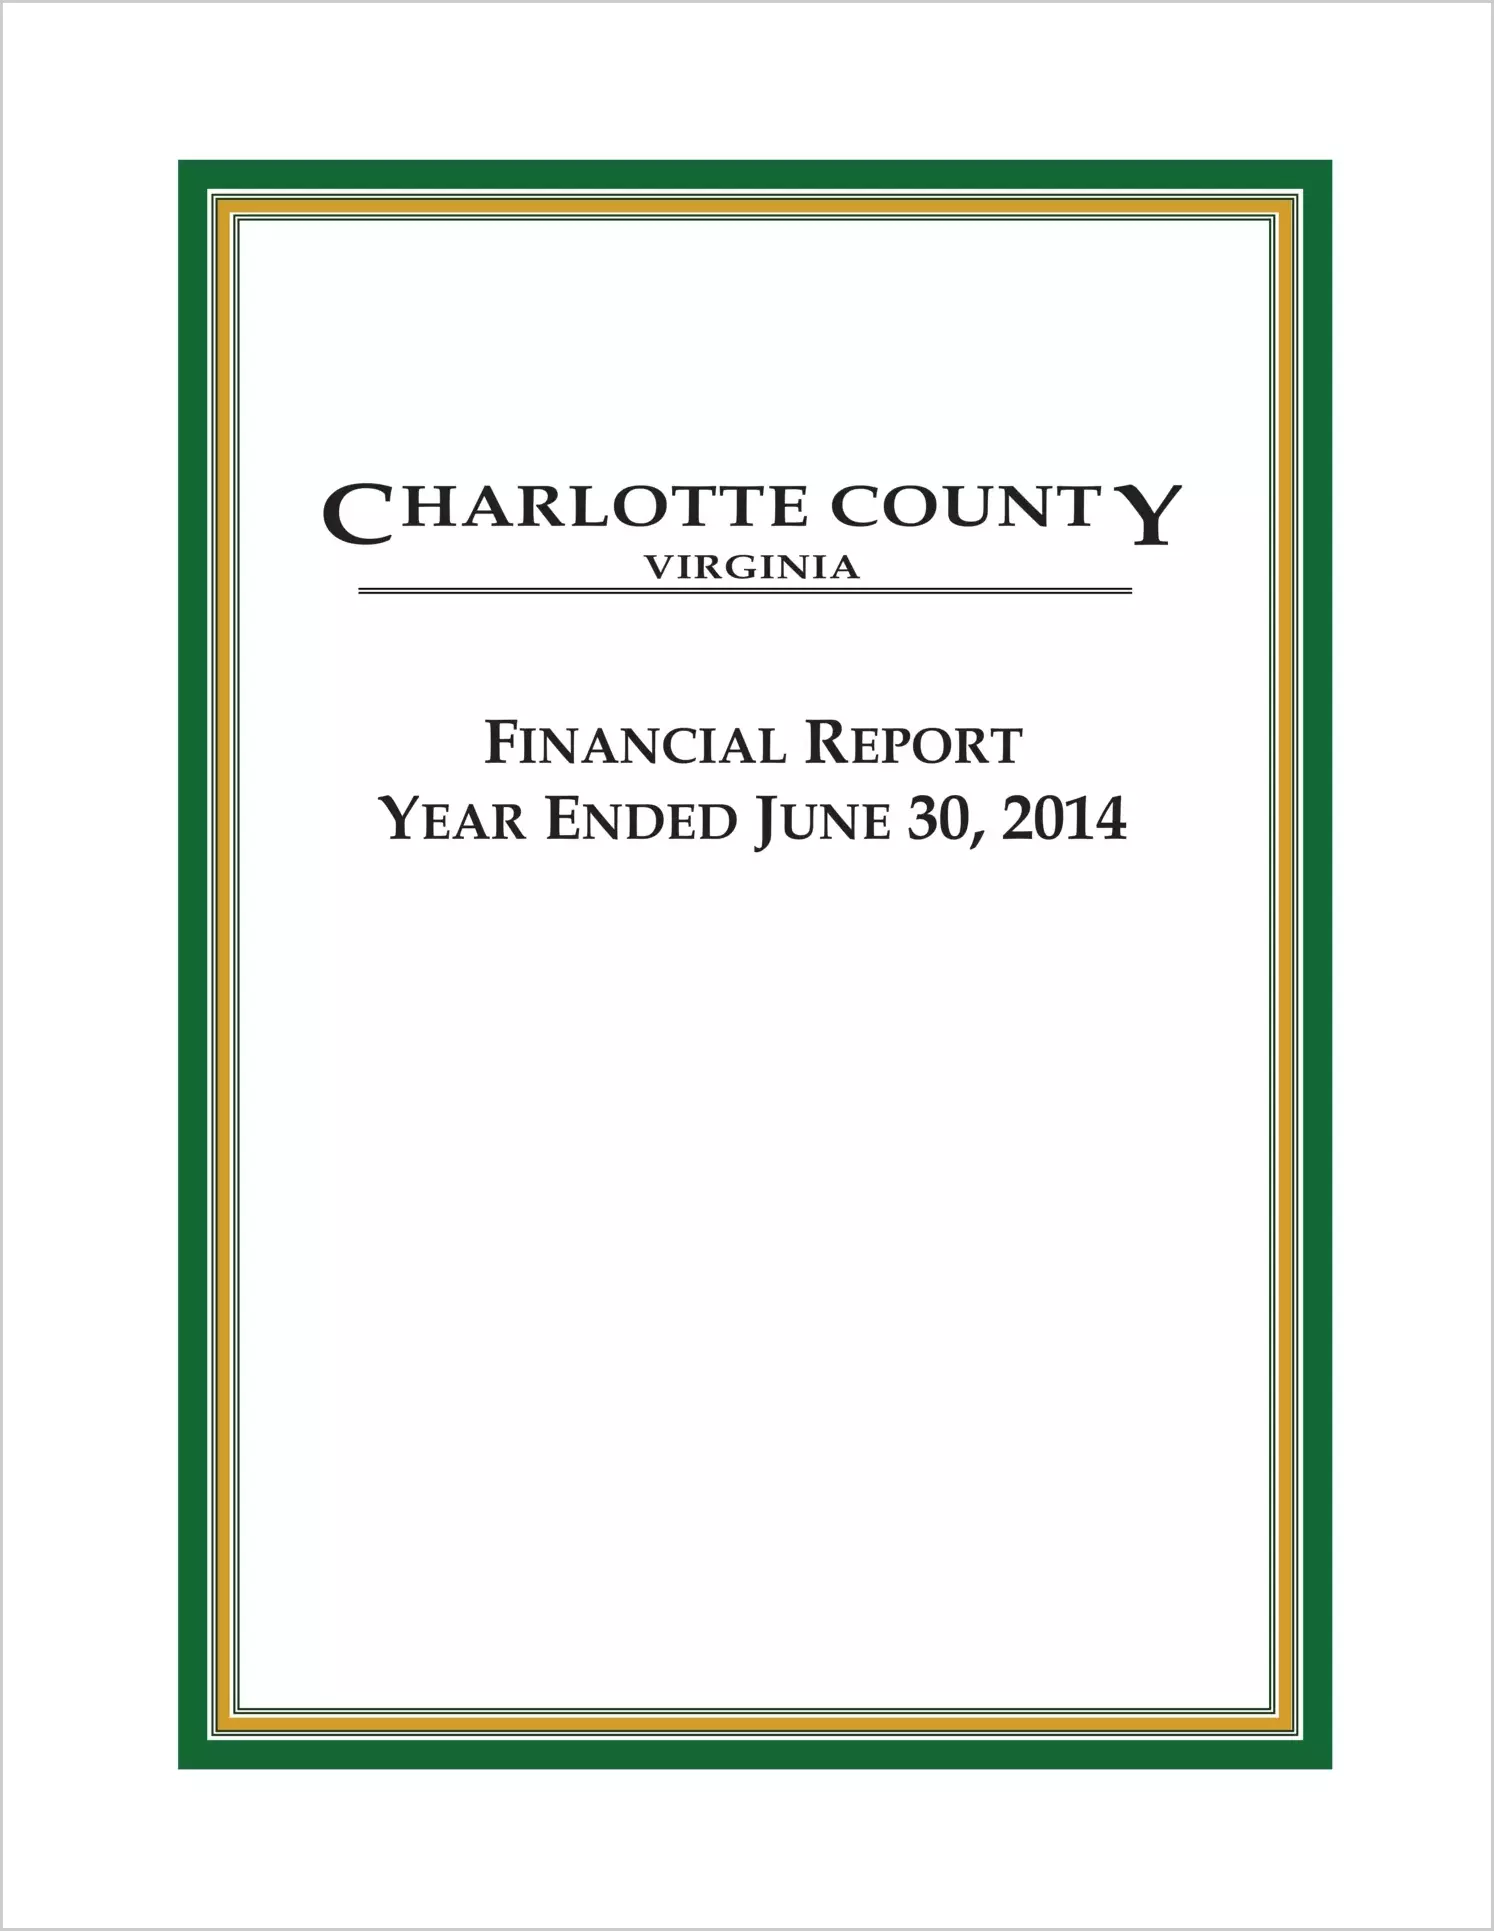 2014 Annual Financial Report for County of Charlotte